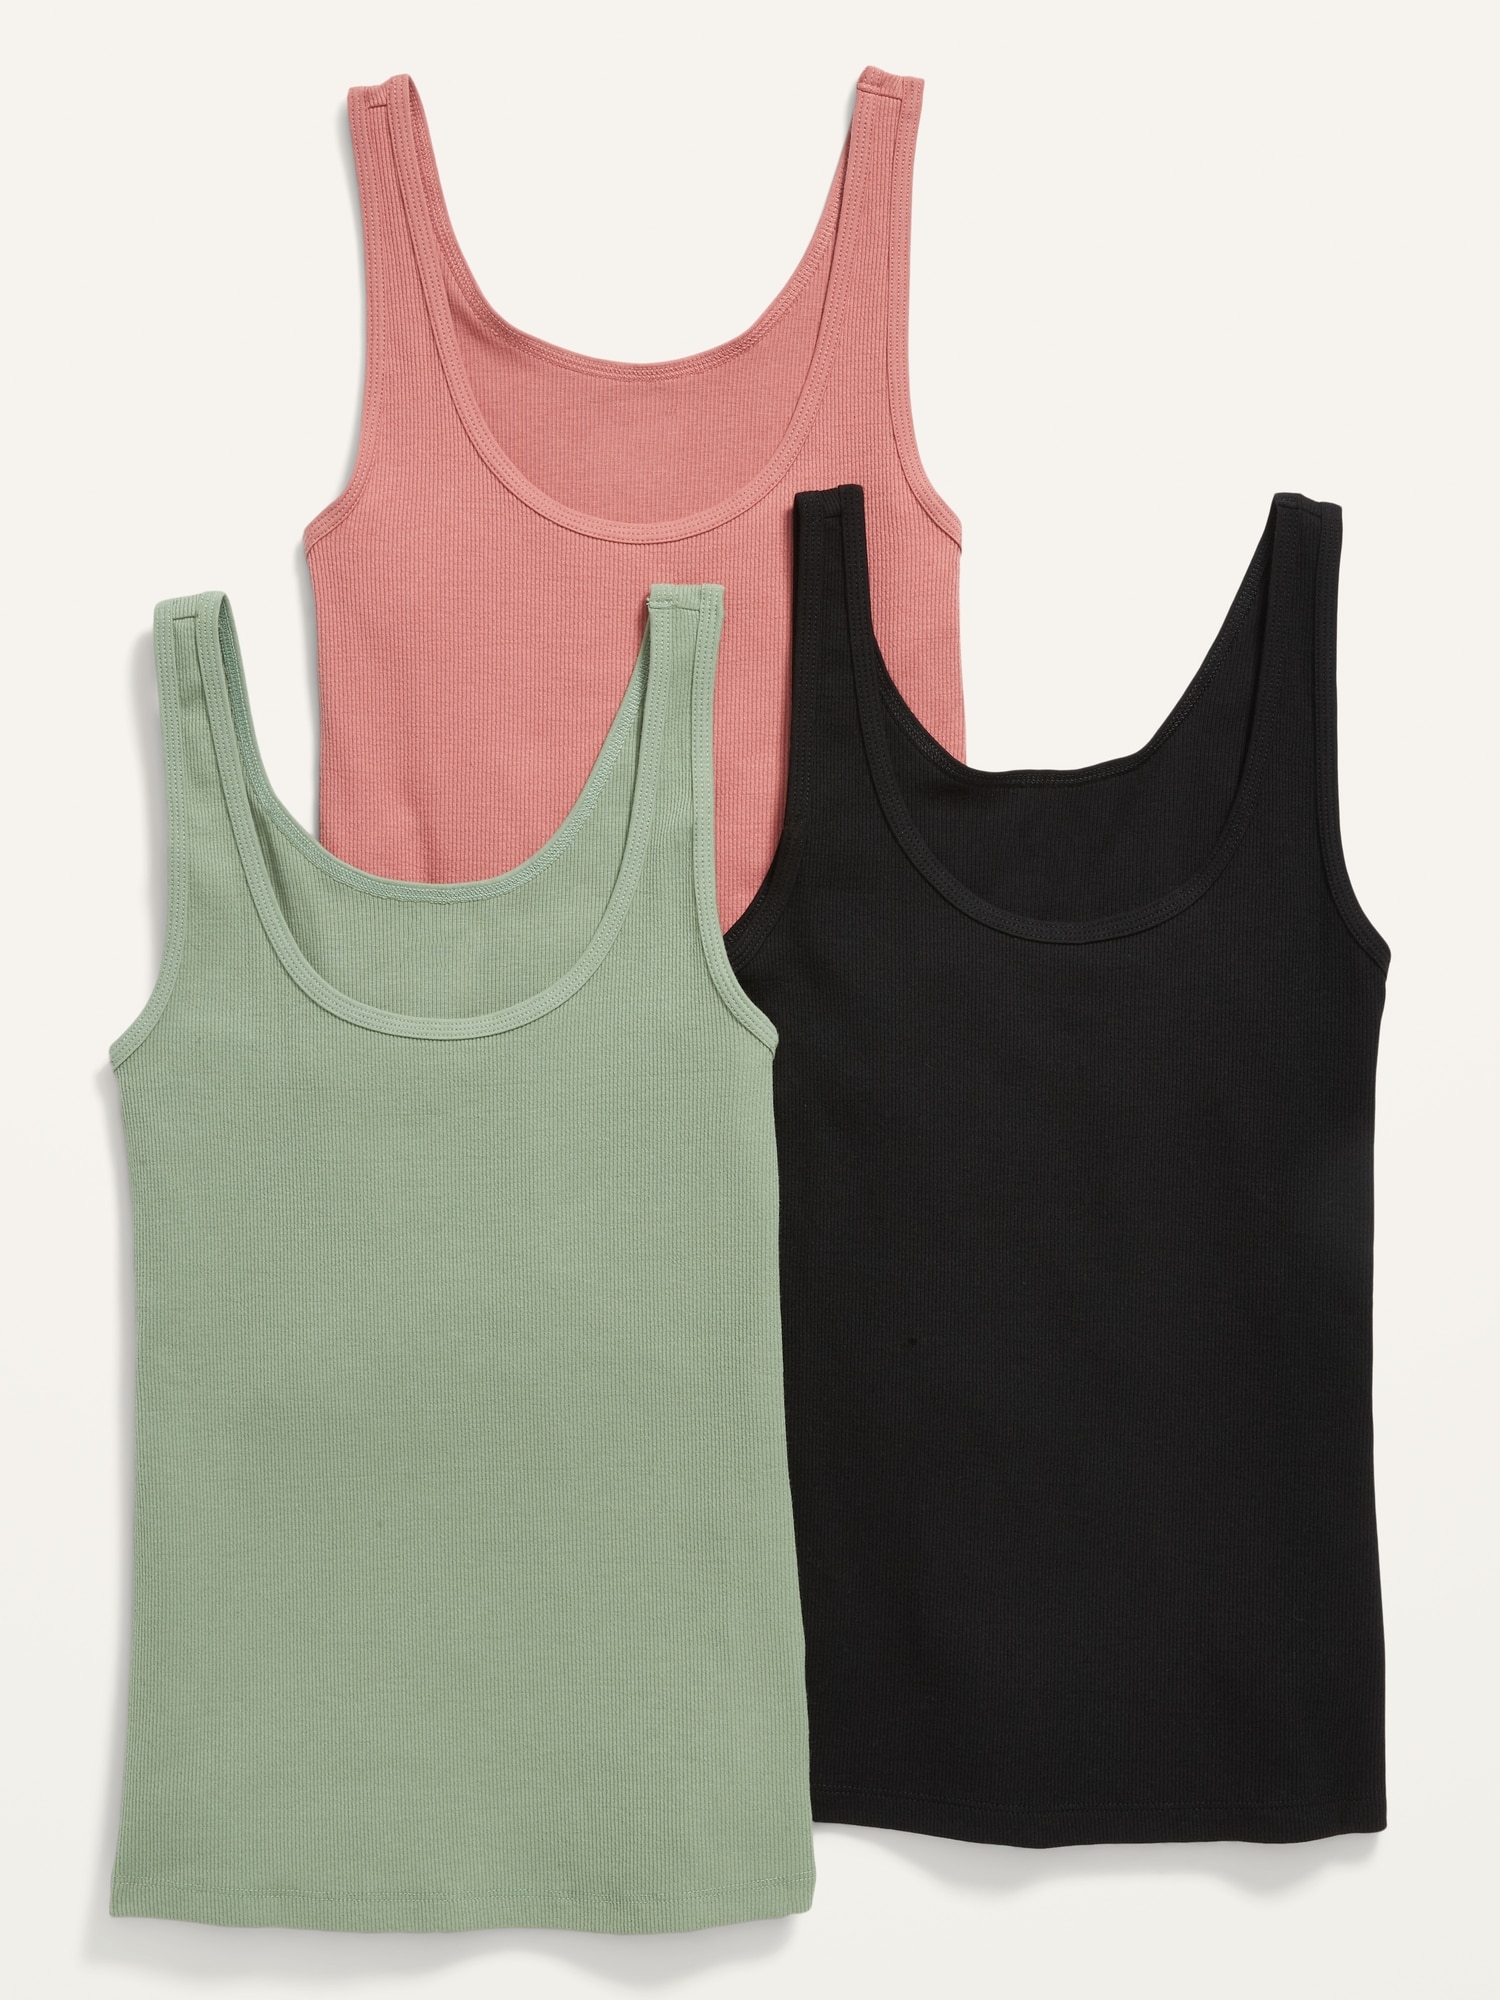 Slim Fit Rib Knit Tank Top 3 Pack For Women Old Navy 8033